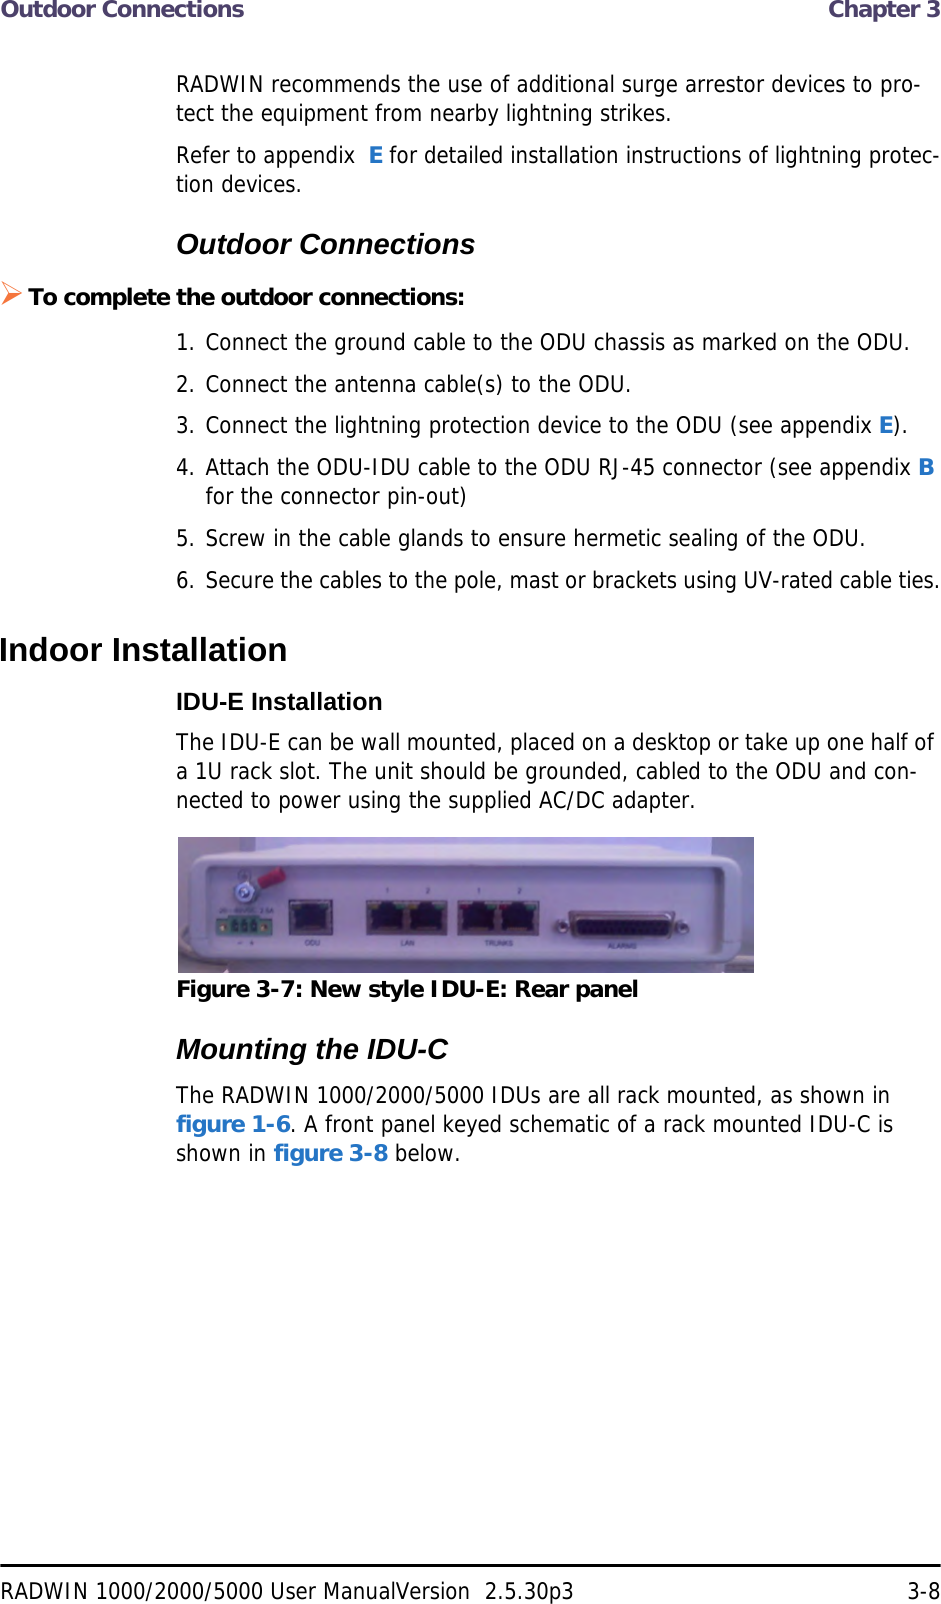 Outdoor Connections  Chapter 3RADWIN 1000/2000/5000 User ManualVersion  2.5.30p3 3-8RADWIN recommends the use of additional surge arrestor devices to pro-tect the equipment from nearby lightning strikes.Refer to appendix  E for detailed installation instructions of lightning protec-tion devices.Outdoor ConnectionsTo complete the outdoor connections:1. Connect the ground cable to the ODU chassis as marked on the ODU.2. Connect the antenna cable(s) to the ODU.3. Connect the lightning protection device to the ODU (see appendix E).4. Attach the ODU-IDU cable to the ODU RJ-45 connector (see appendix B for the connector pin-out)5. Screw in the cable glands to ensure hermetic sealing of the ODU.6. Secure the cables to the pole, mast or brackets using UV-rated cable ties.Indoor InstallationIDU-E InstallationThe IDU-E can be wall mounted, placed on a desktop or take up one half of a 1U rack slot. The unit should be grounded, cabled to the ODU and con-nected to power using the supplied AC/DC adapter.Figure 3-7: New style IDU-E: Rear panelMounting the IDU-CThe RADWIN 1000/2000/5000 IDUs are all rack mounted, as shown in figure 1-6. A front panel keyed schematic of a rack mounted IDU-C is shown in figure 3-8 below.